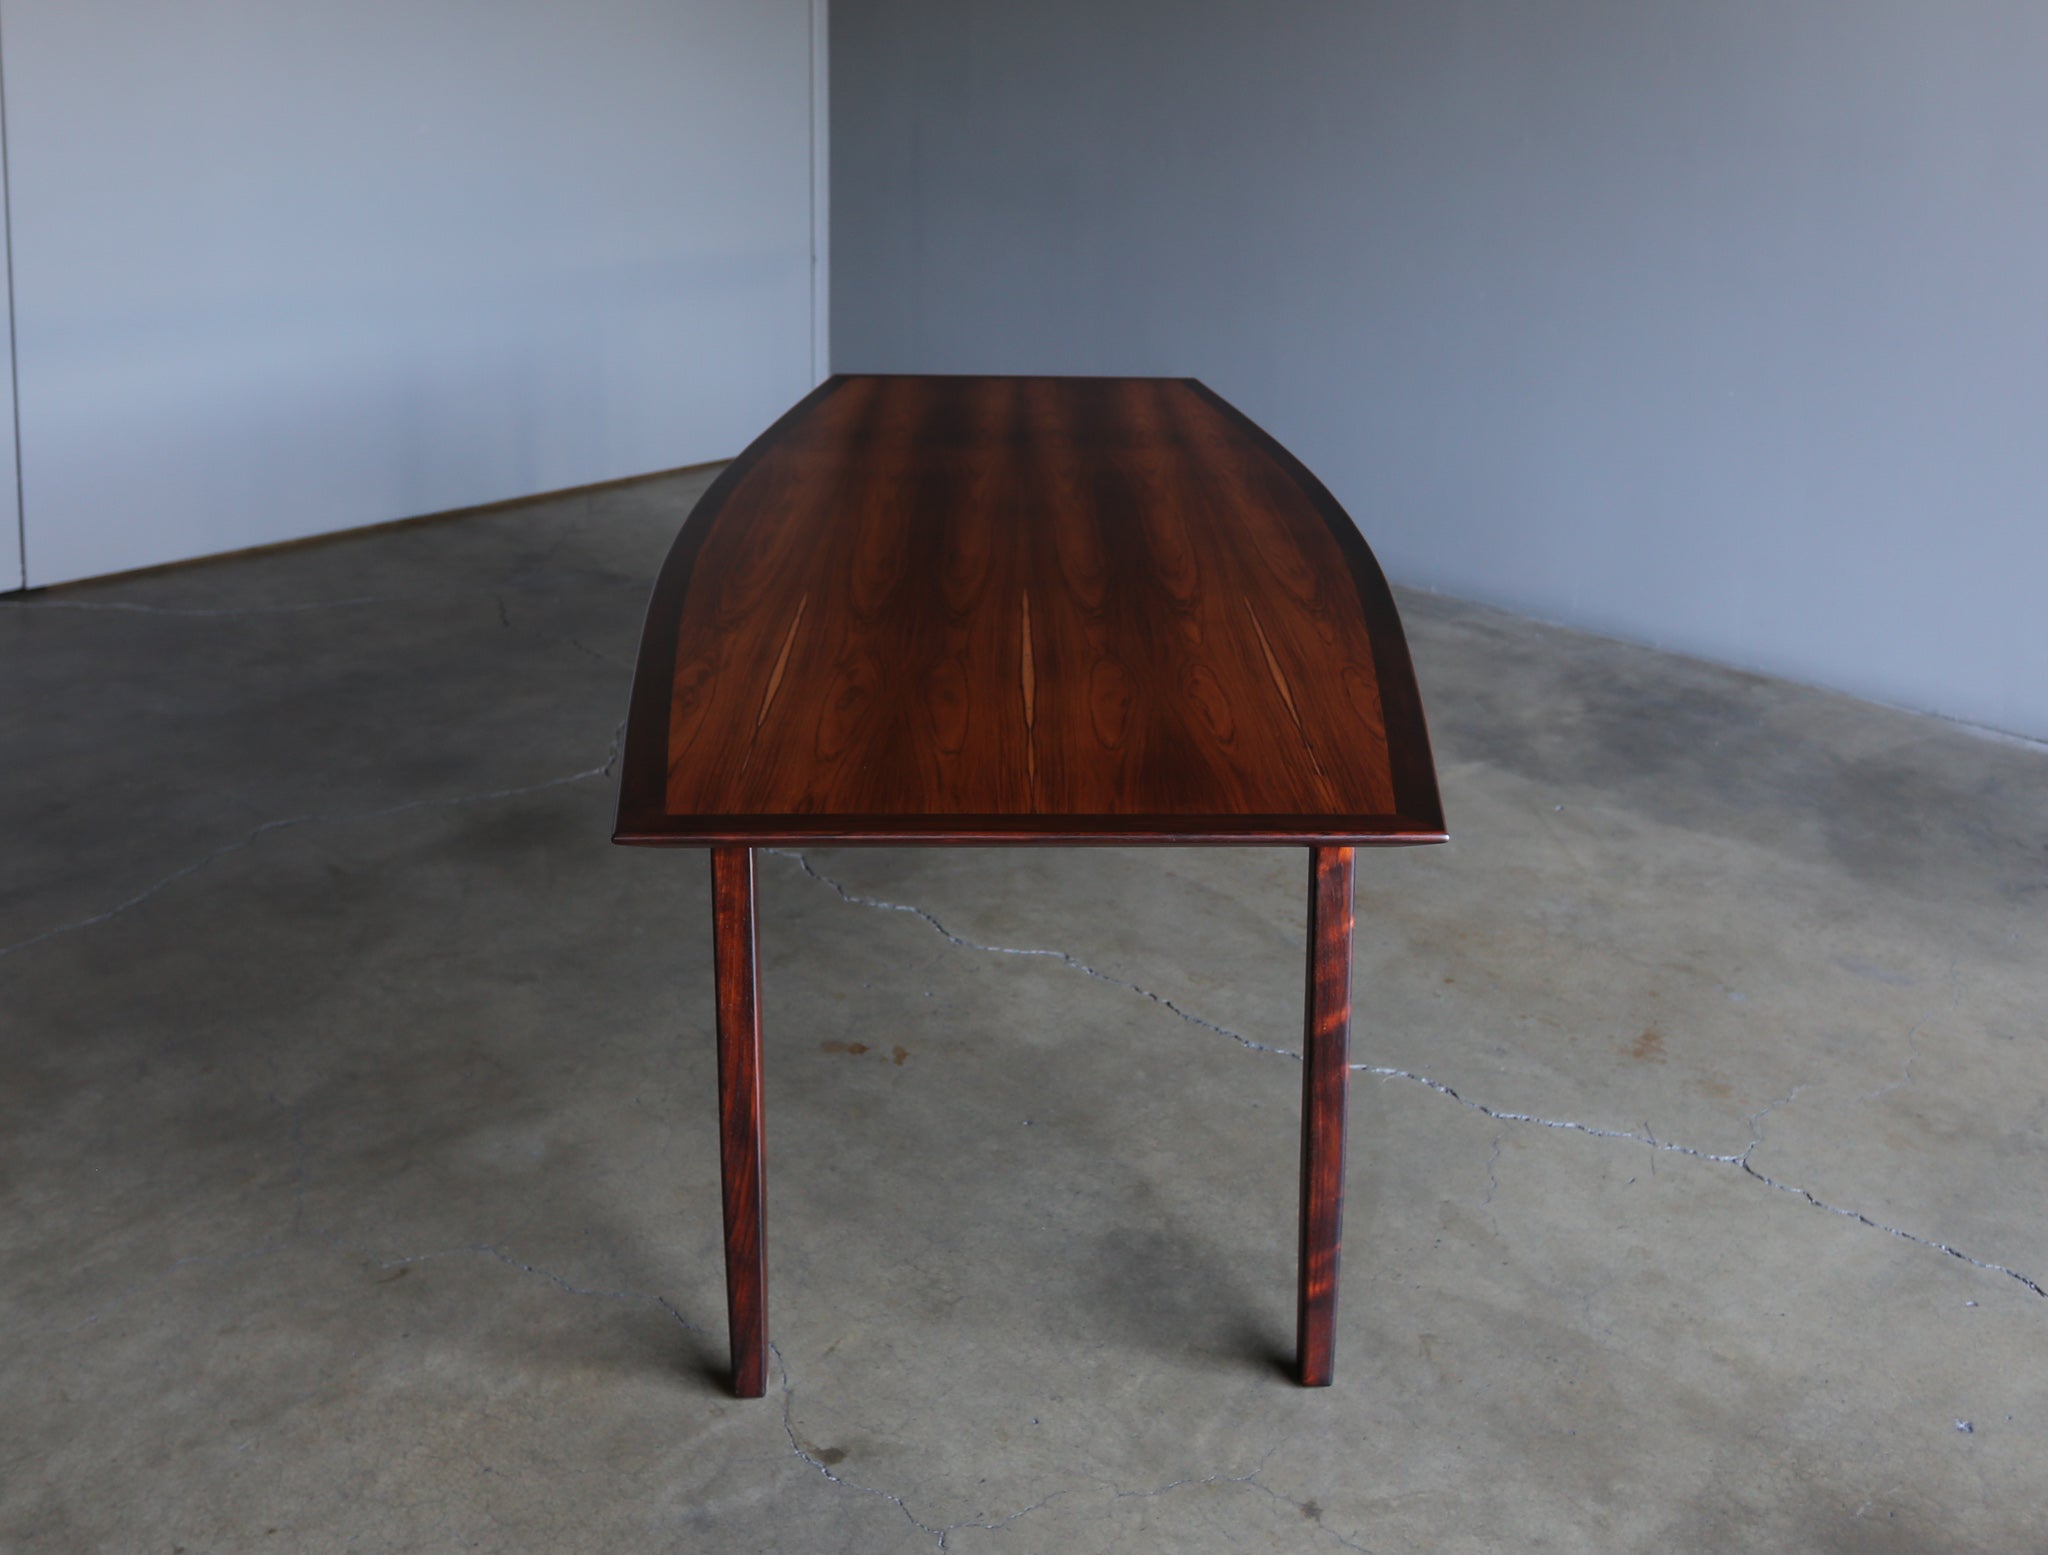 = SOLD = Florence Knoll Rosewood Dining Table Distributed by FORMA Brazil, circa 1960